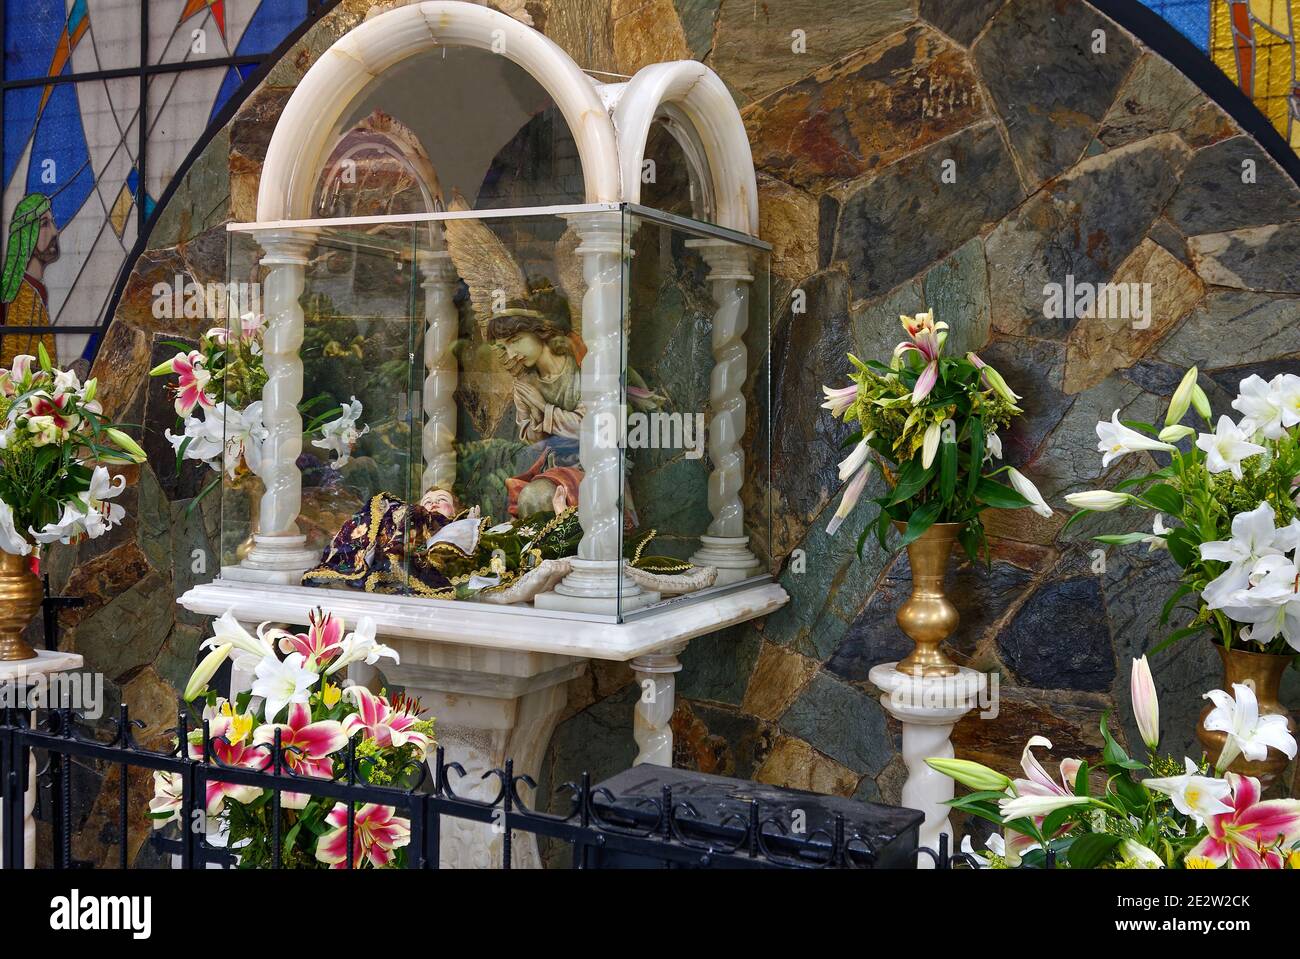 angels and flowers, wayside shrine, marble case, vases, iron fence, outdoor decoration, South America, Quito, Ecuador Stock Photo